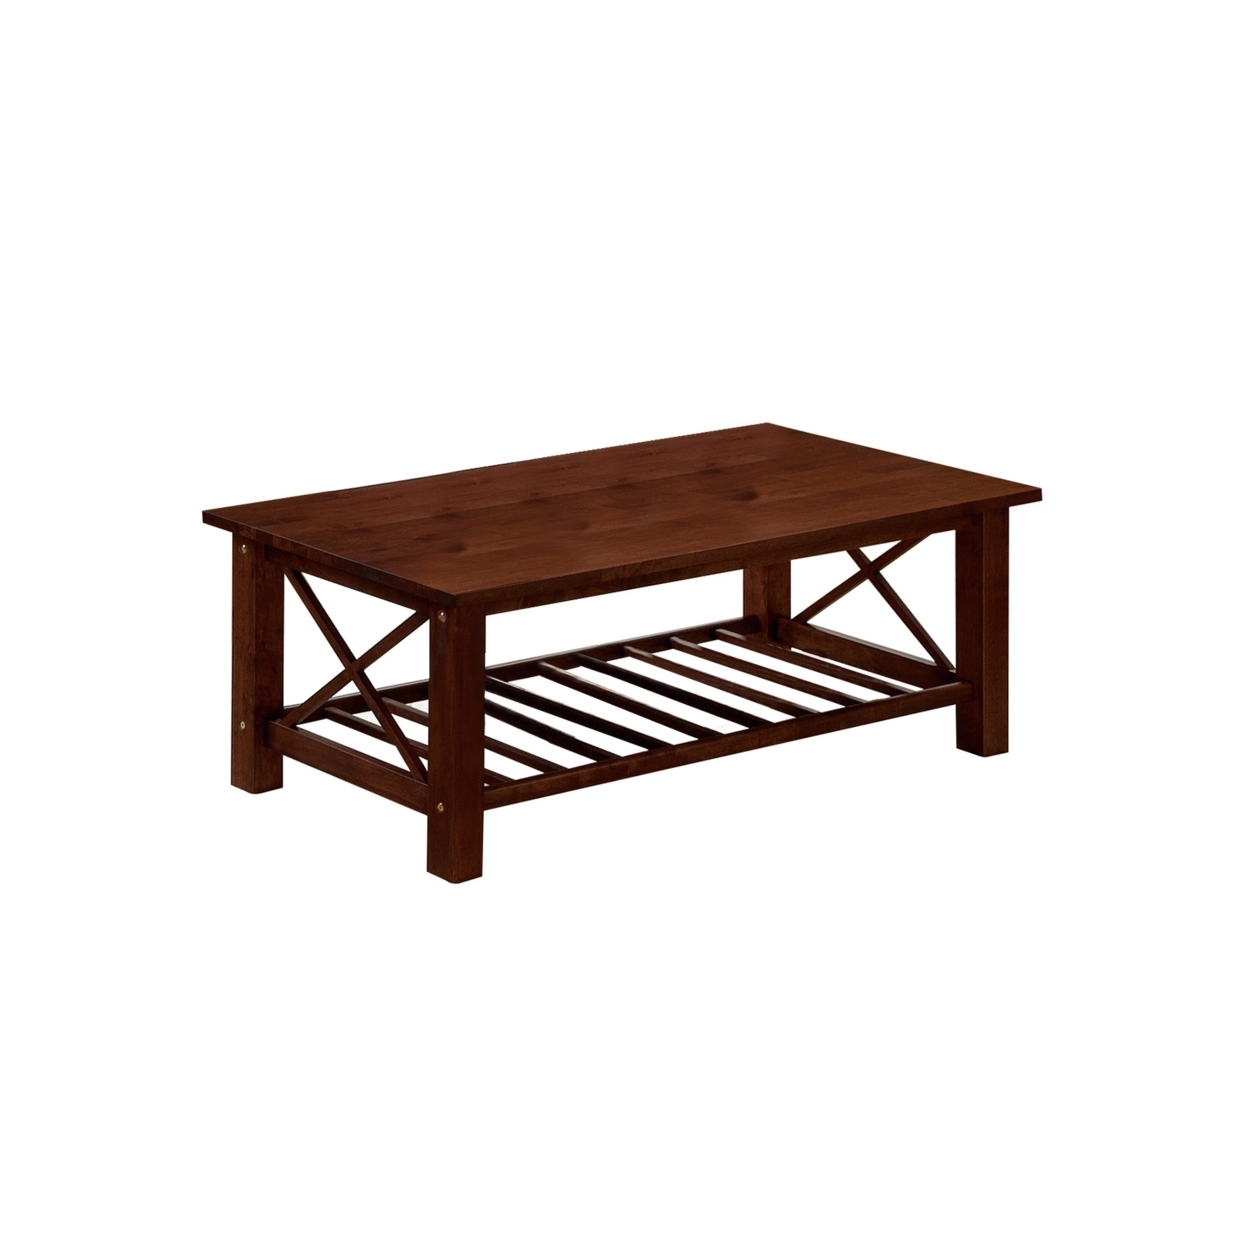 3 Piece Slatted Bottom Shelf Wooden Coffee Table And End Table, Brown- Saltoro Sherpi